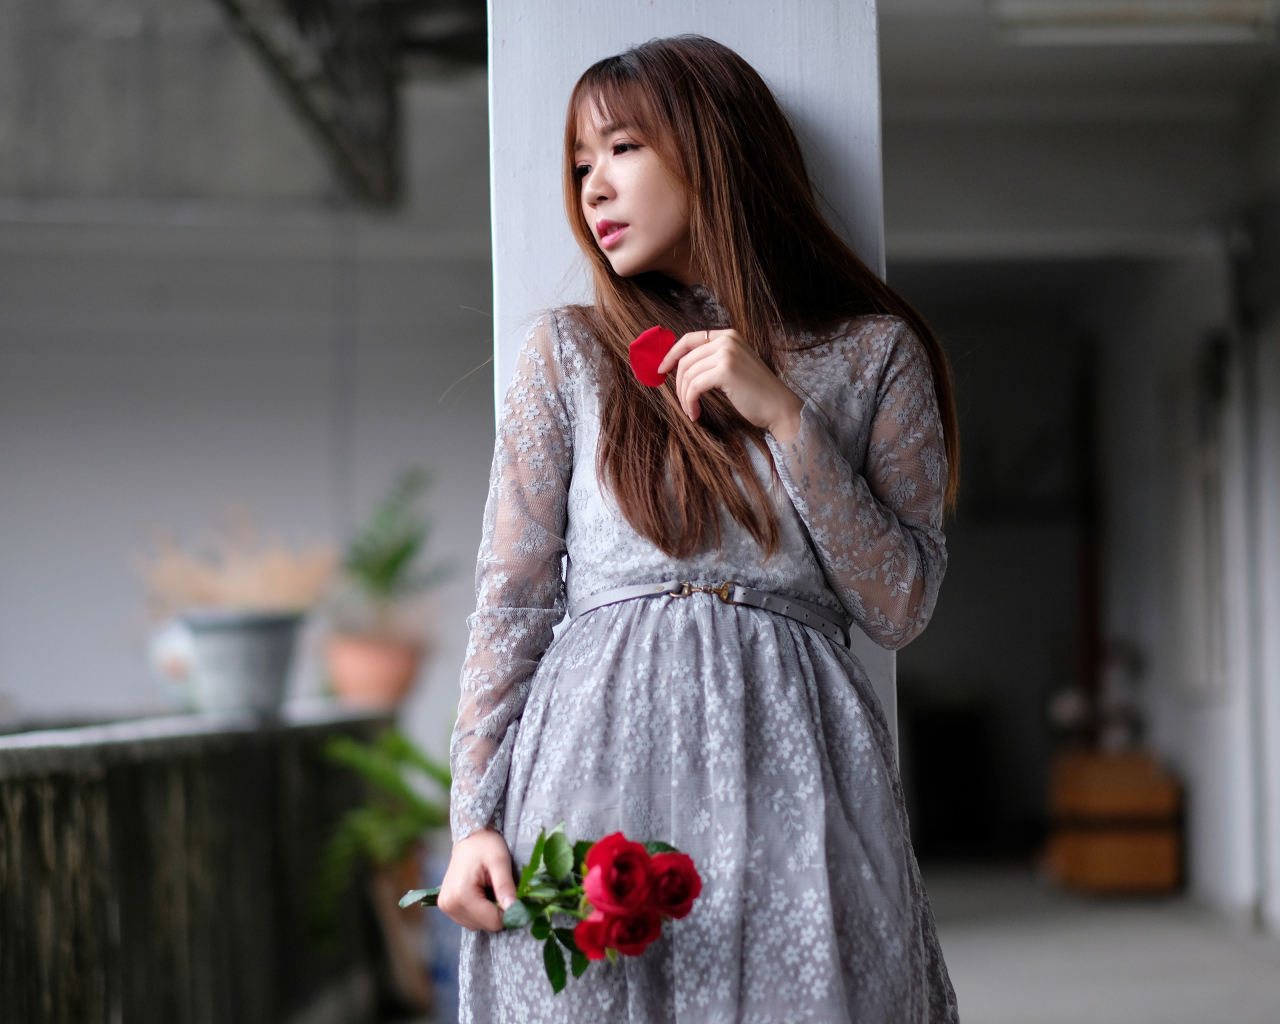 Asian girl in a gray dress with rose flowers